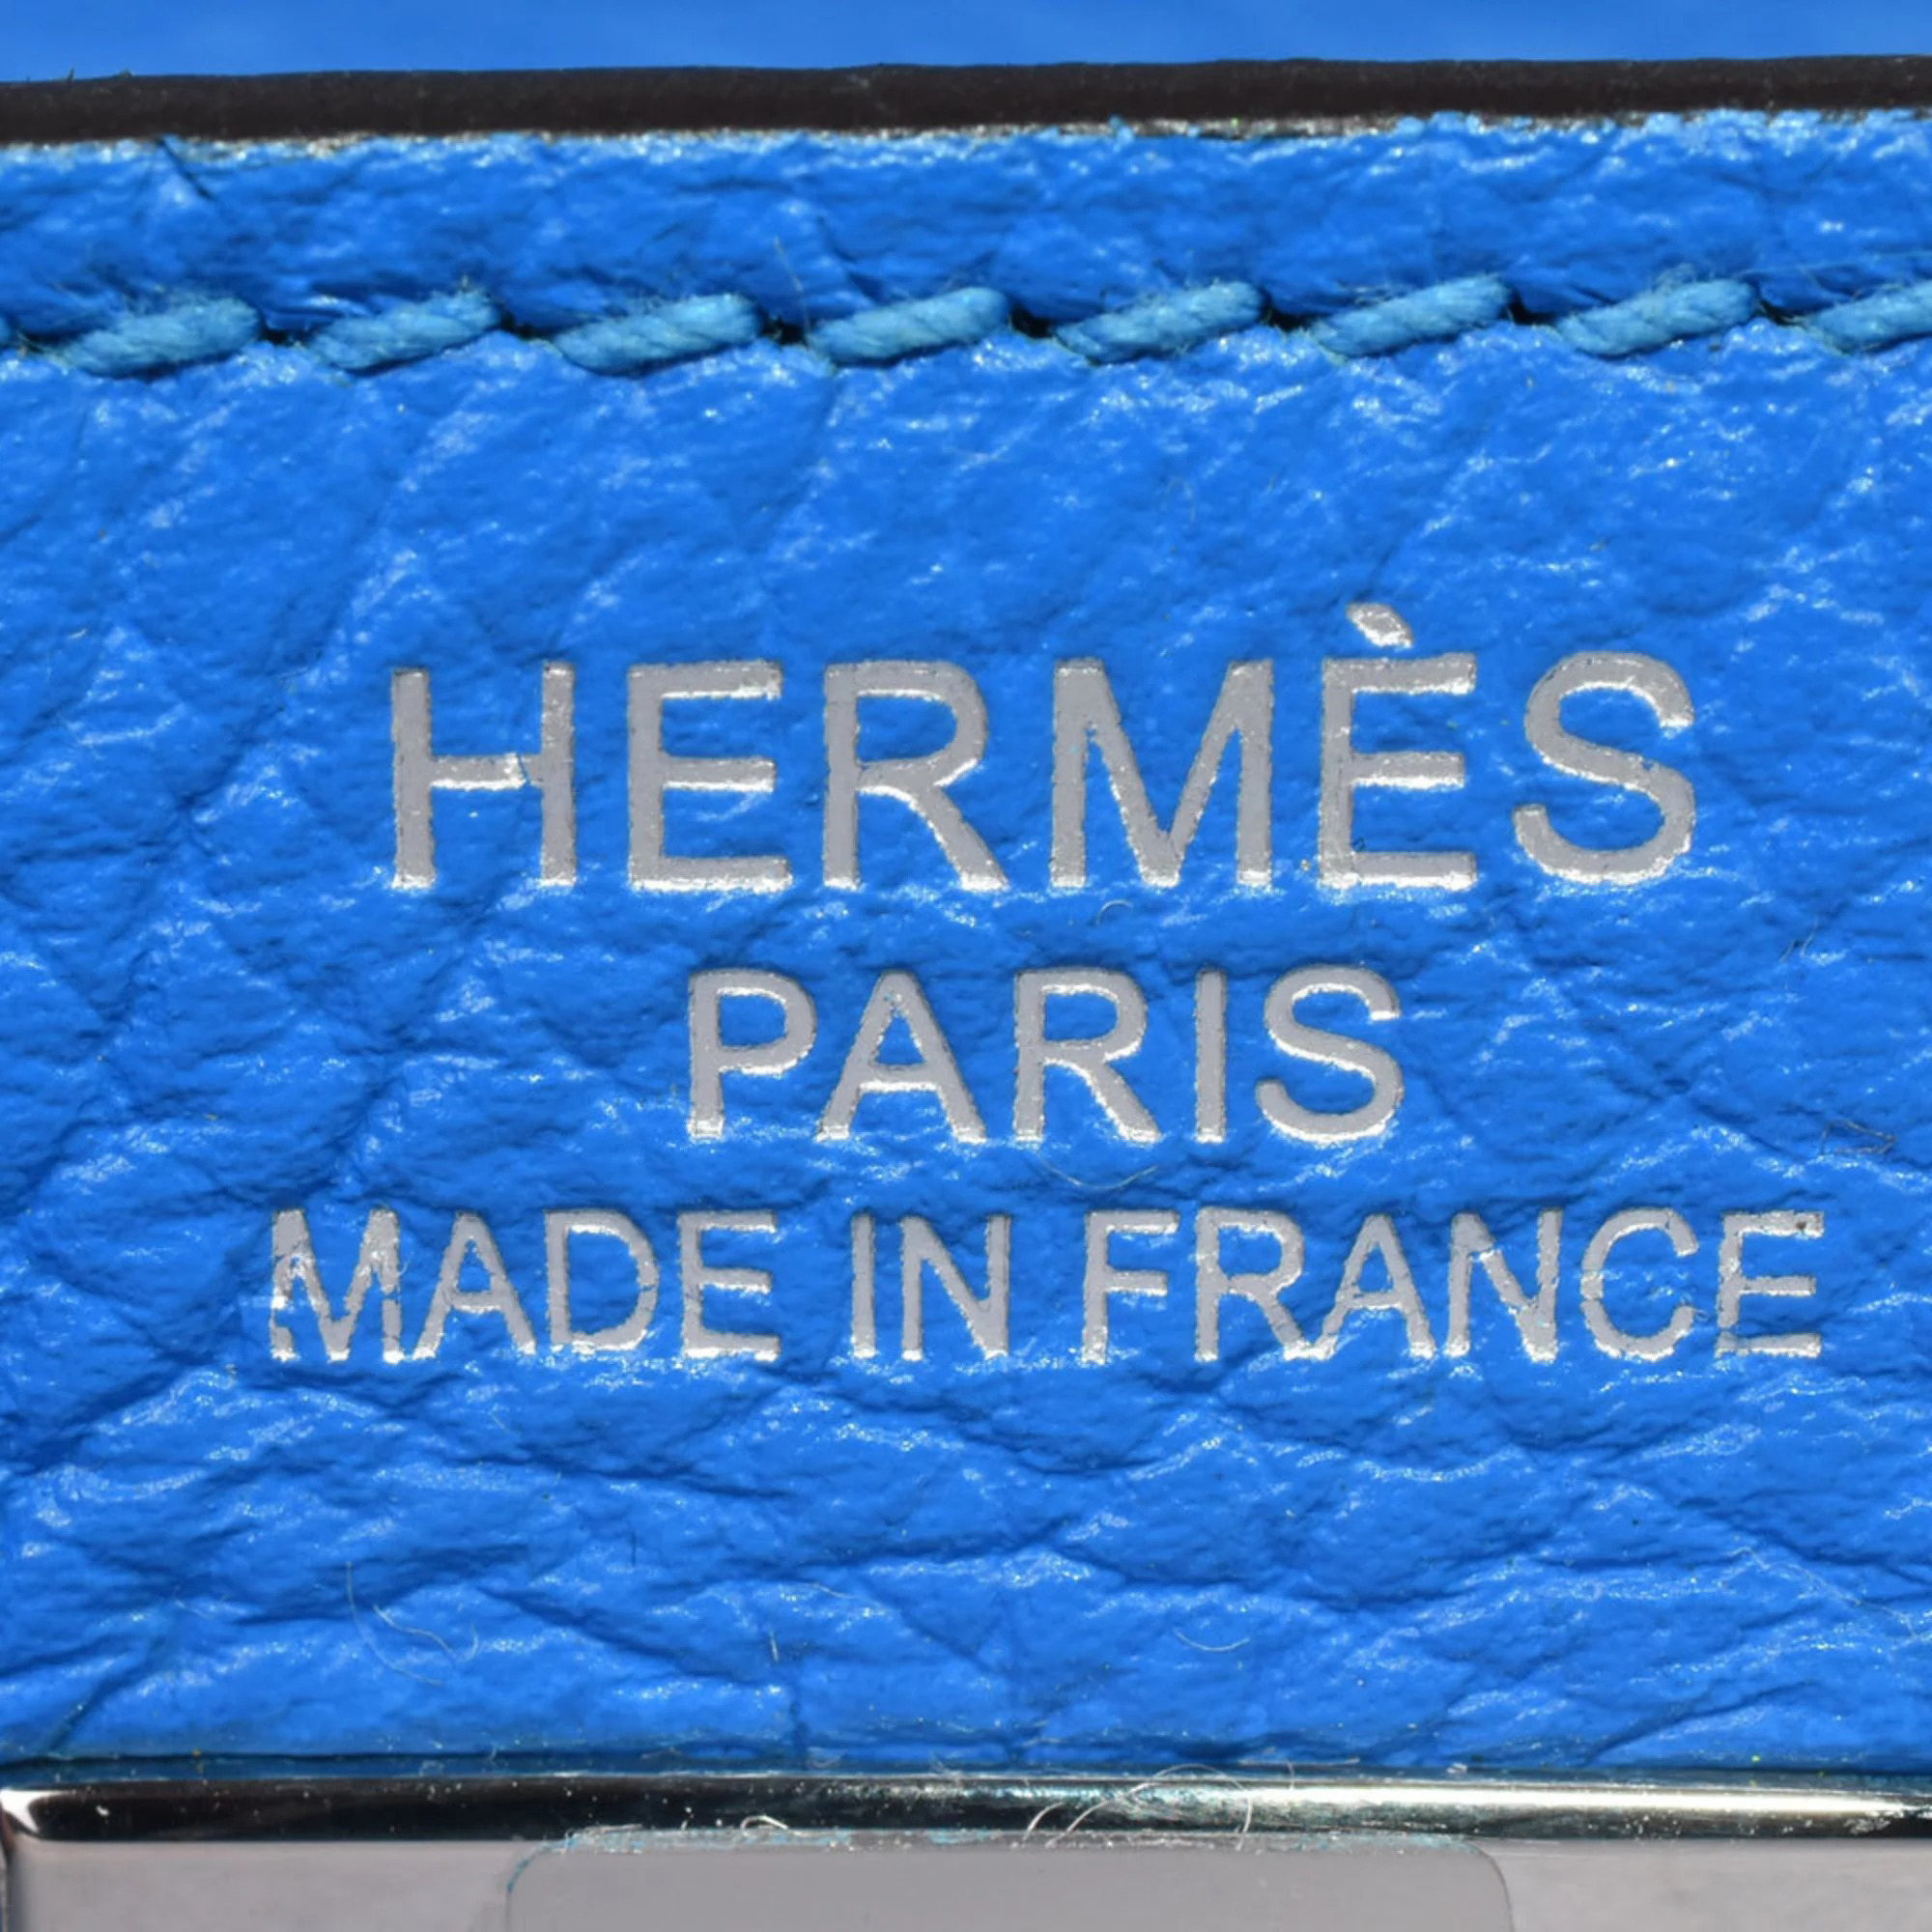 HERMES Kelly 35 Inner Stitch Mykonos Taurillon Clemence R Stamped (manufactured In 2014) Handbag With Strap